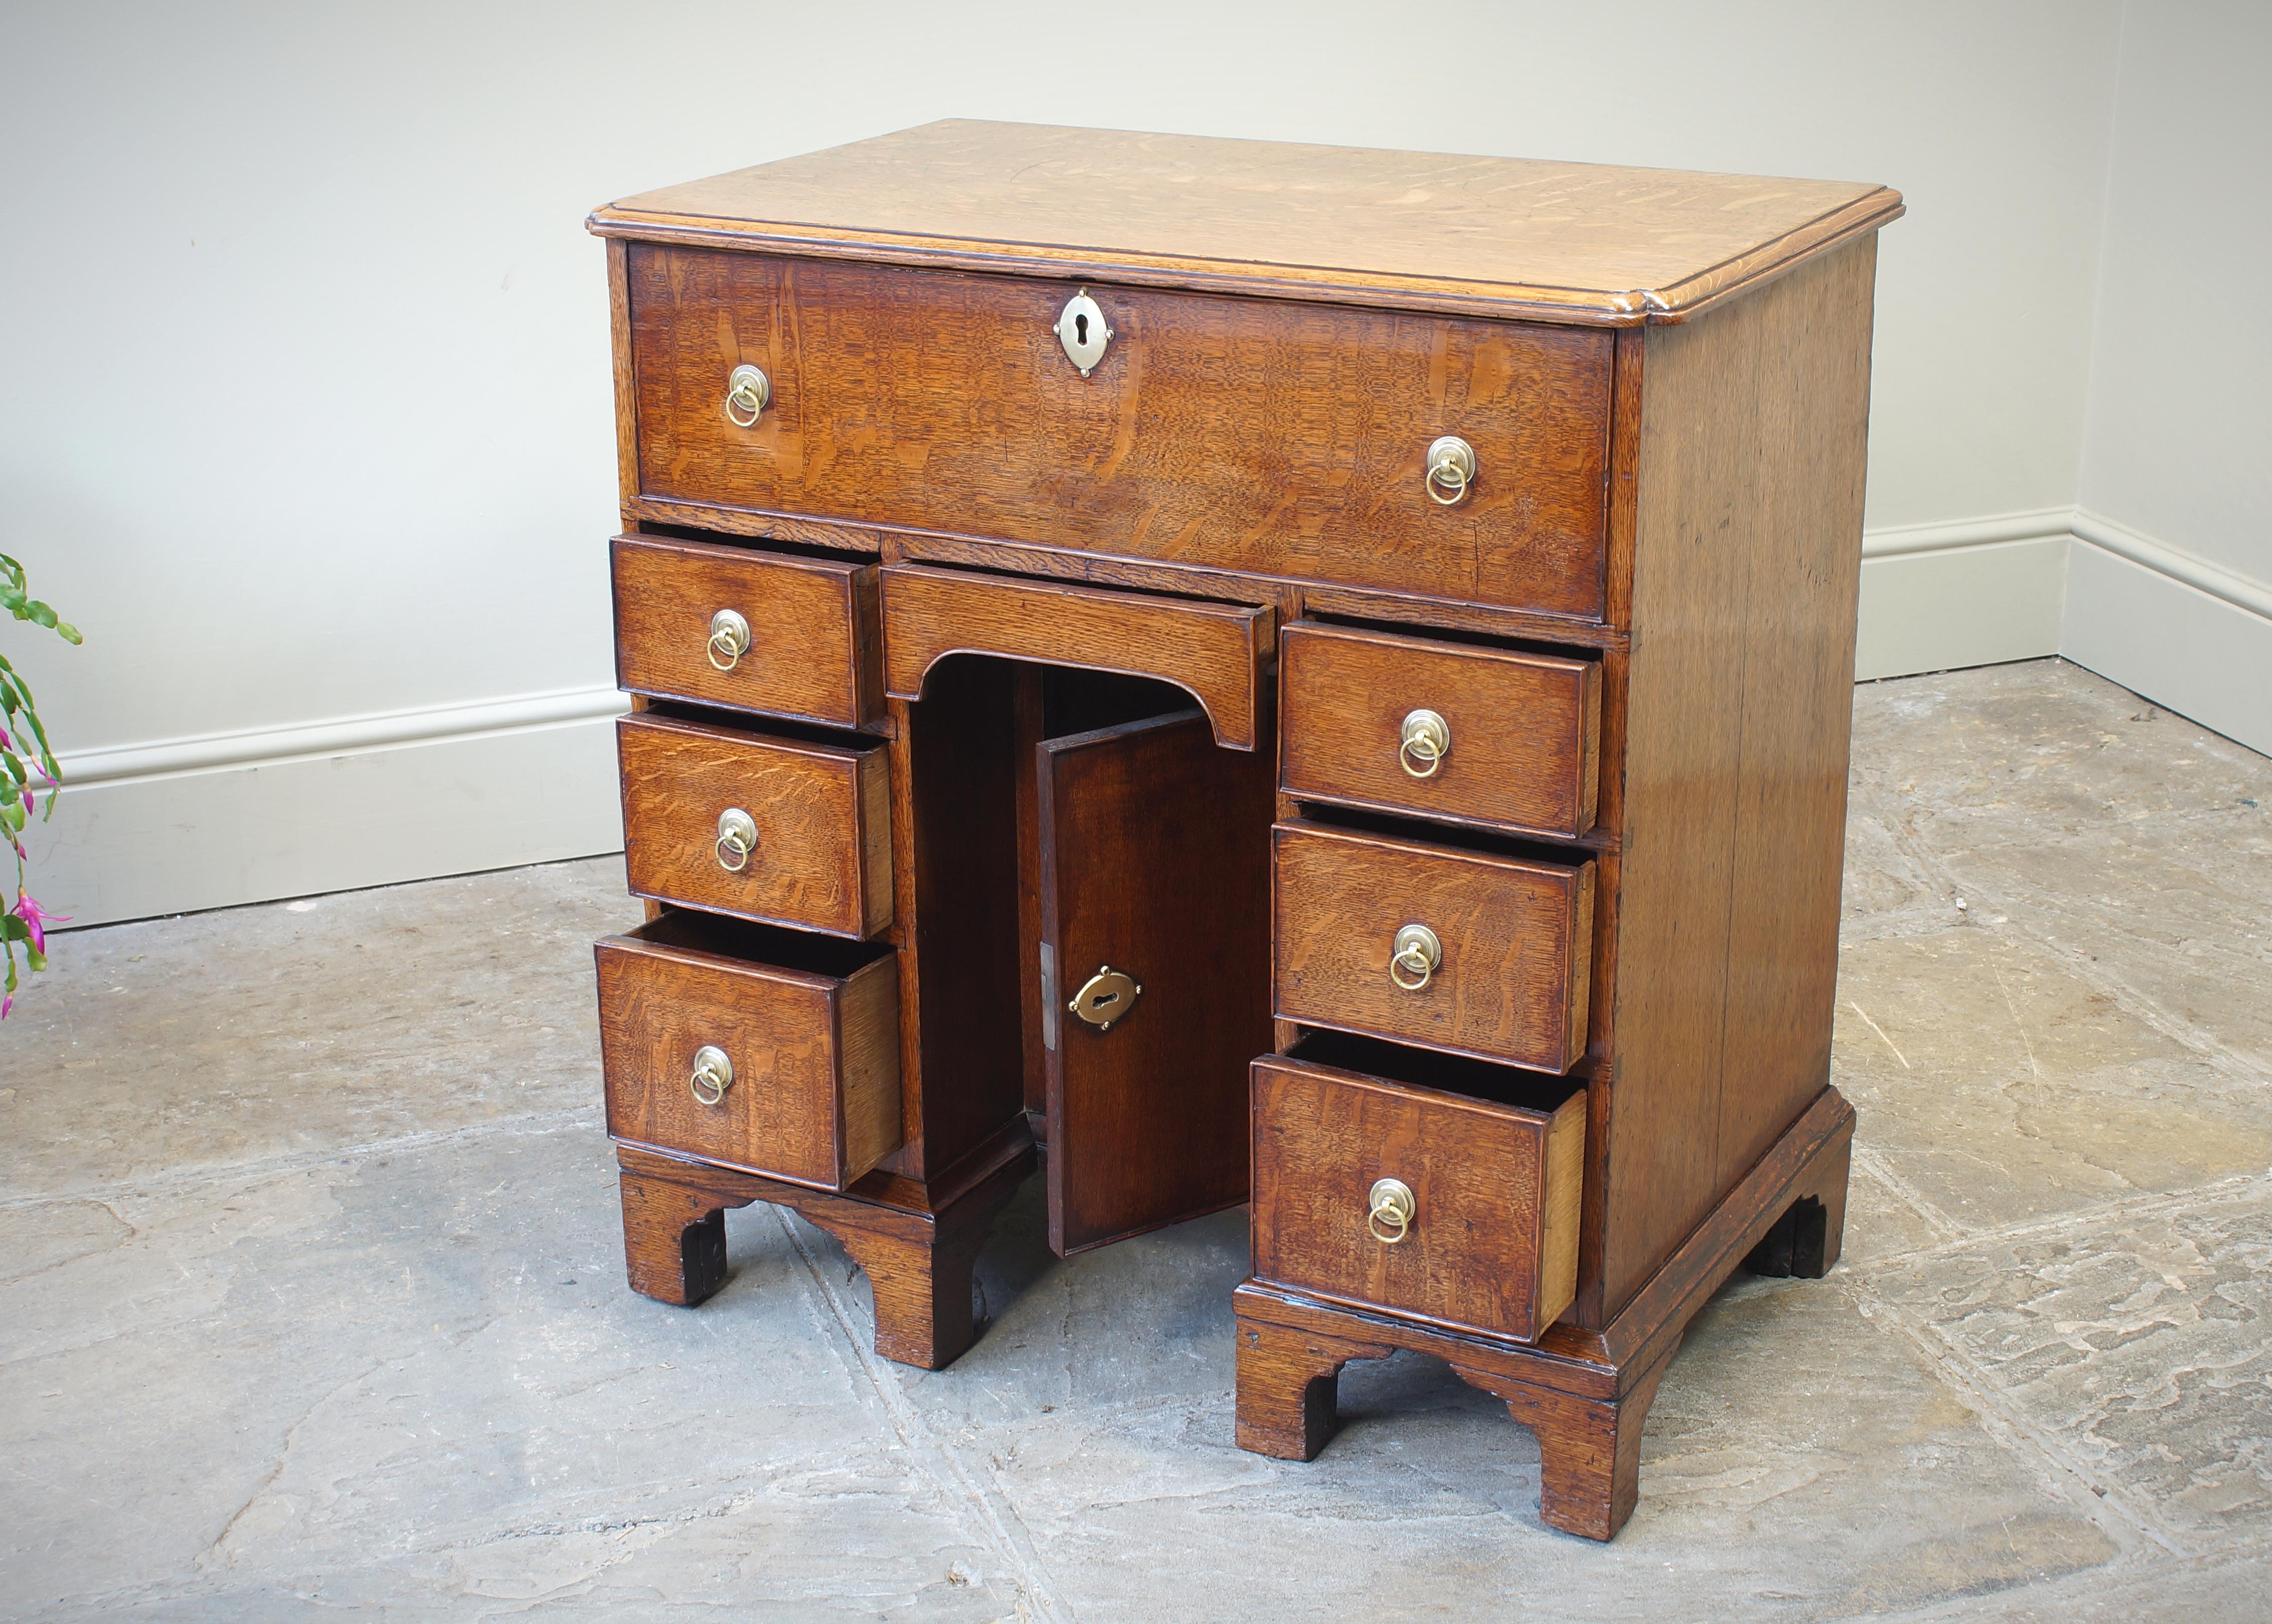 A small Georgian Oak Secretaire Kneehole Desk with a lovely light honey colour. The Desk is made from quality quarter sawn Oak and the top boasts a bold reentrant corner detail. The clean dovetailed linings are also made from quarter sawn oak and